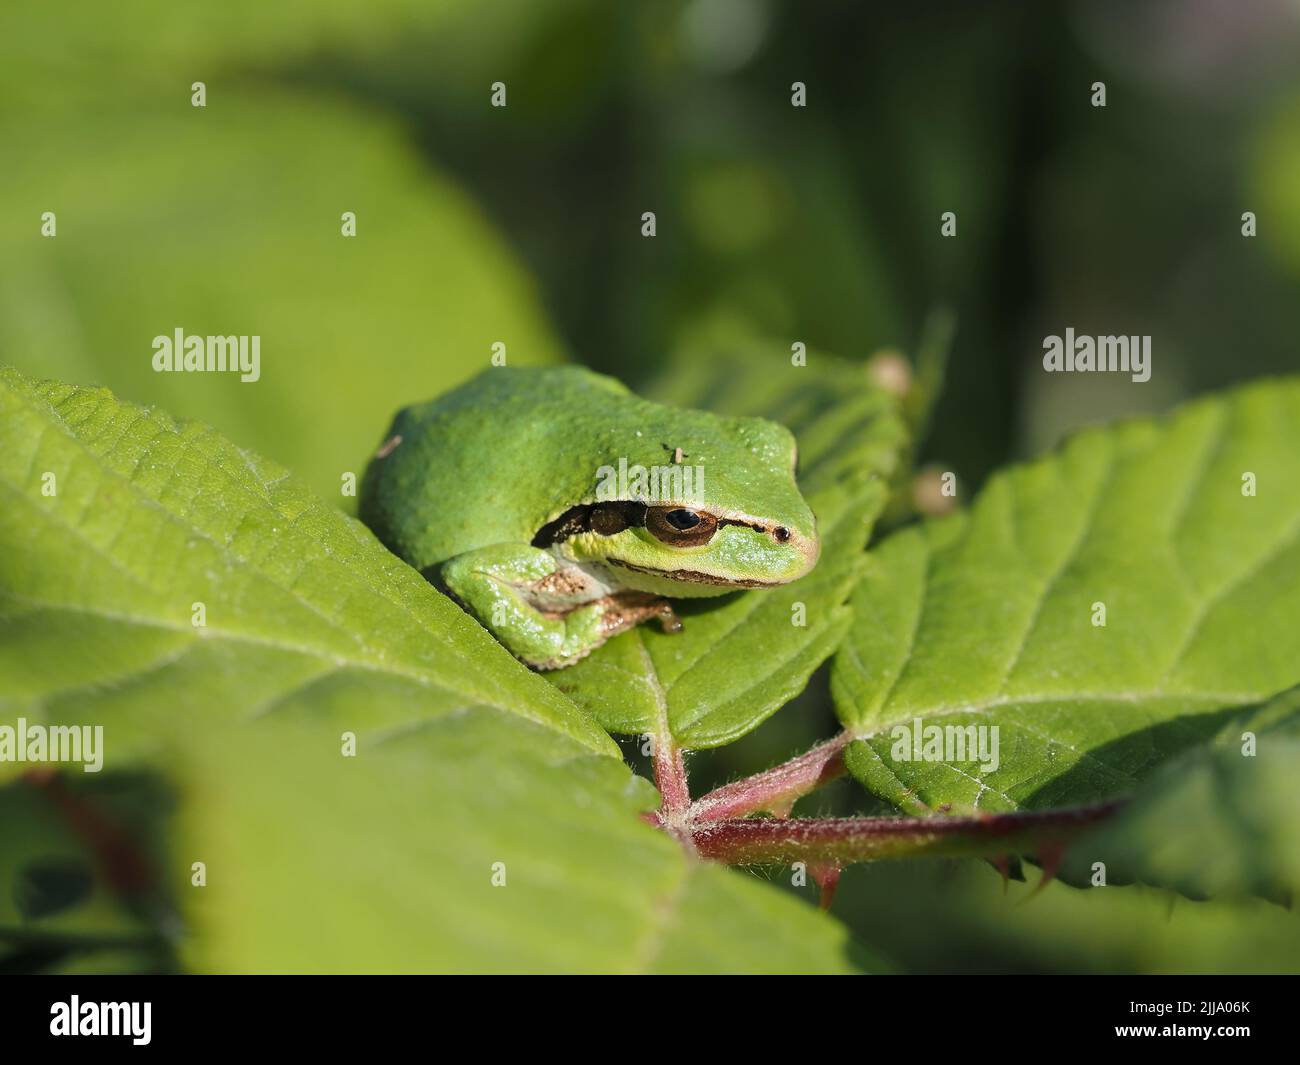 Tiny Pacific tree frog (Pseudacris regilla, green color morph) resting on a leaf in Nisqually National Wildlife Refuge, Washington state, USA Stock Photo